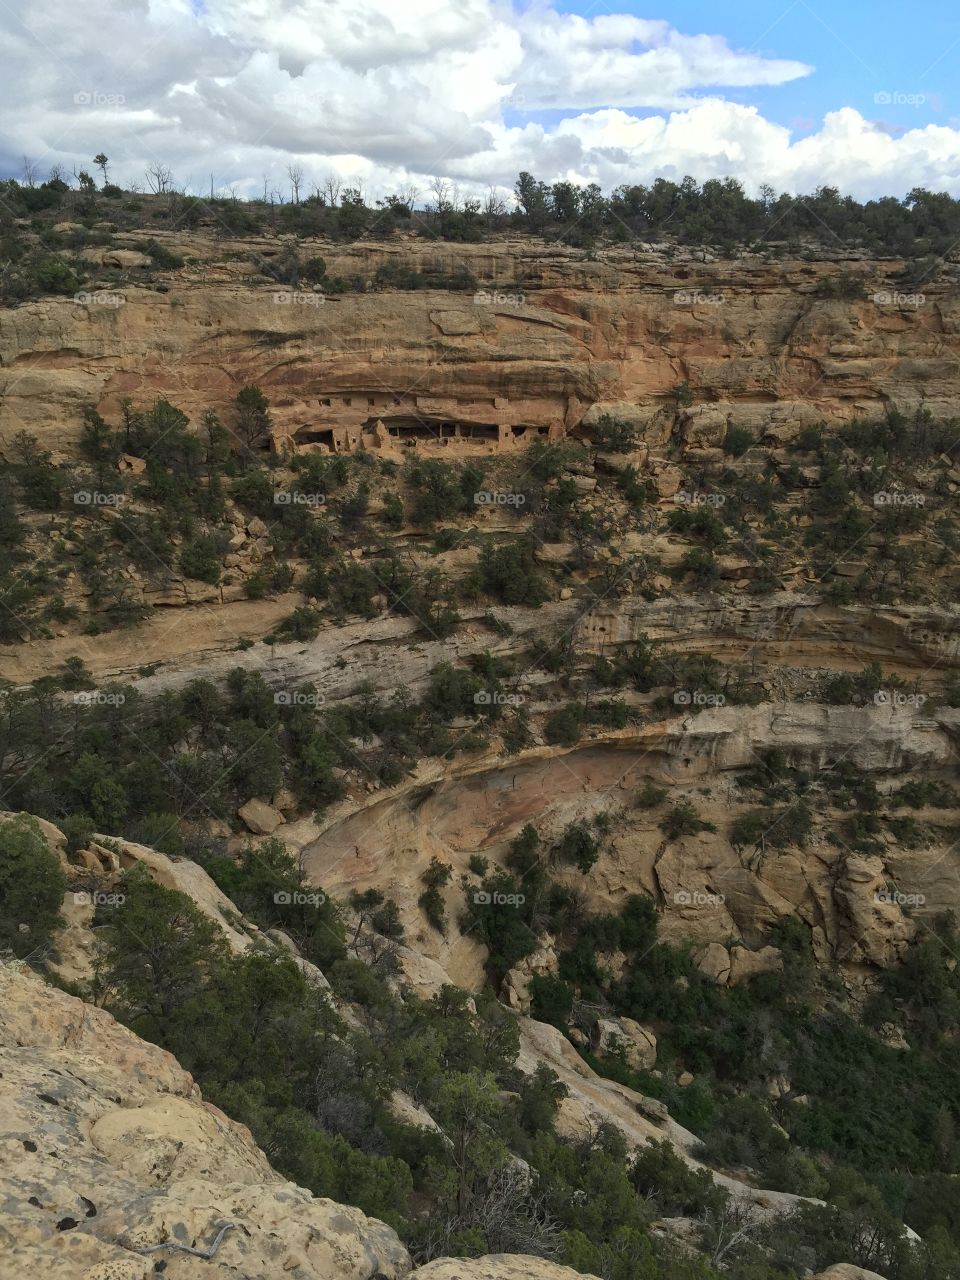 One of the cliff dwellings at Mesa Verde National Park. 